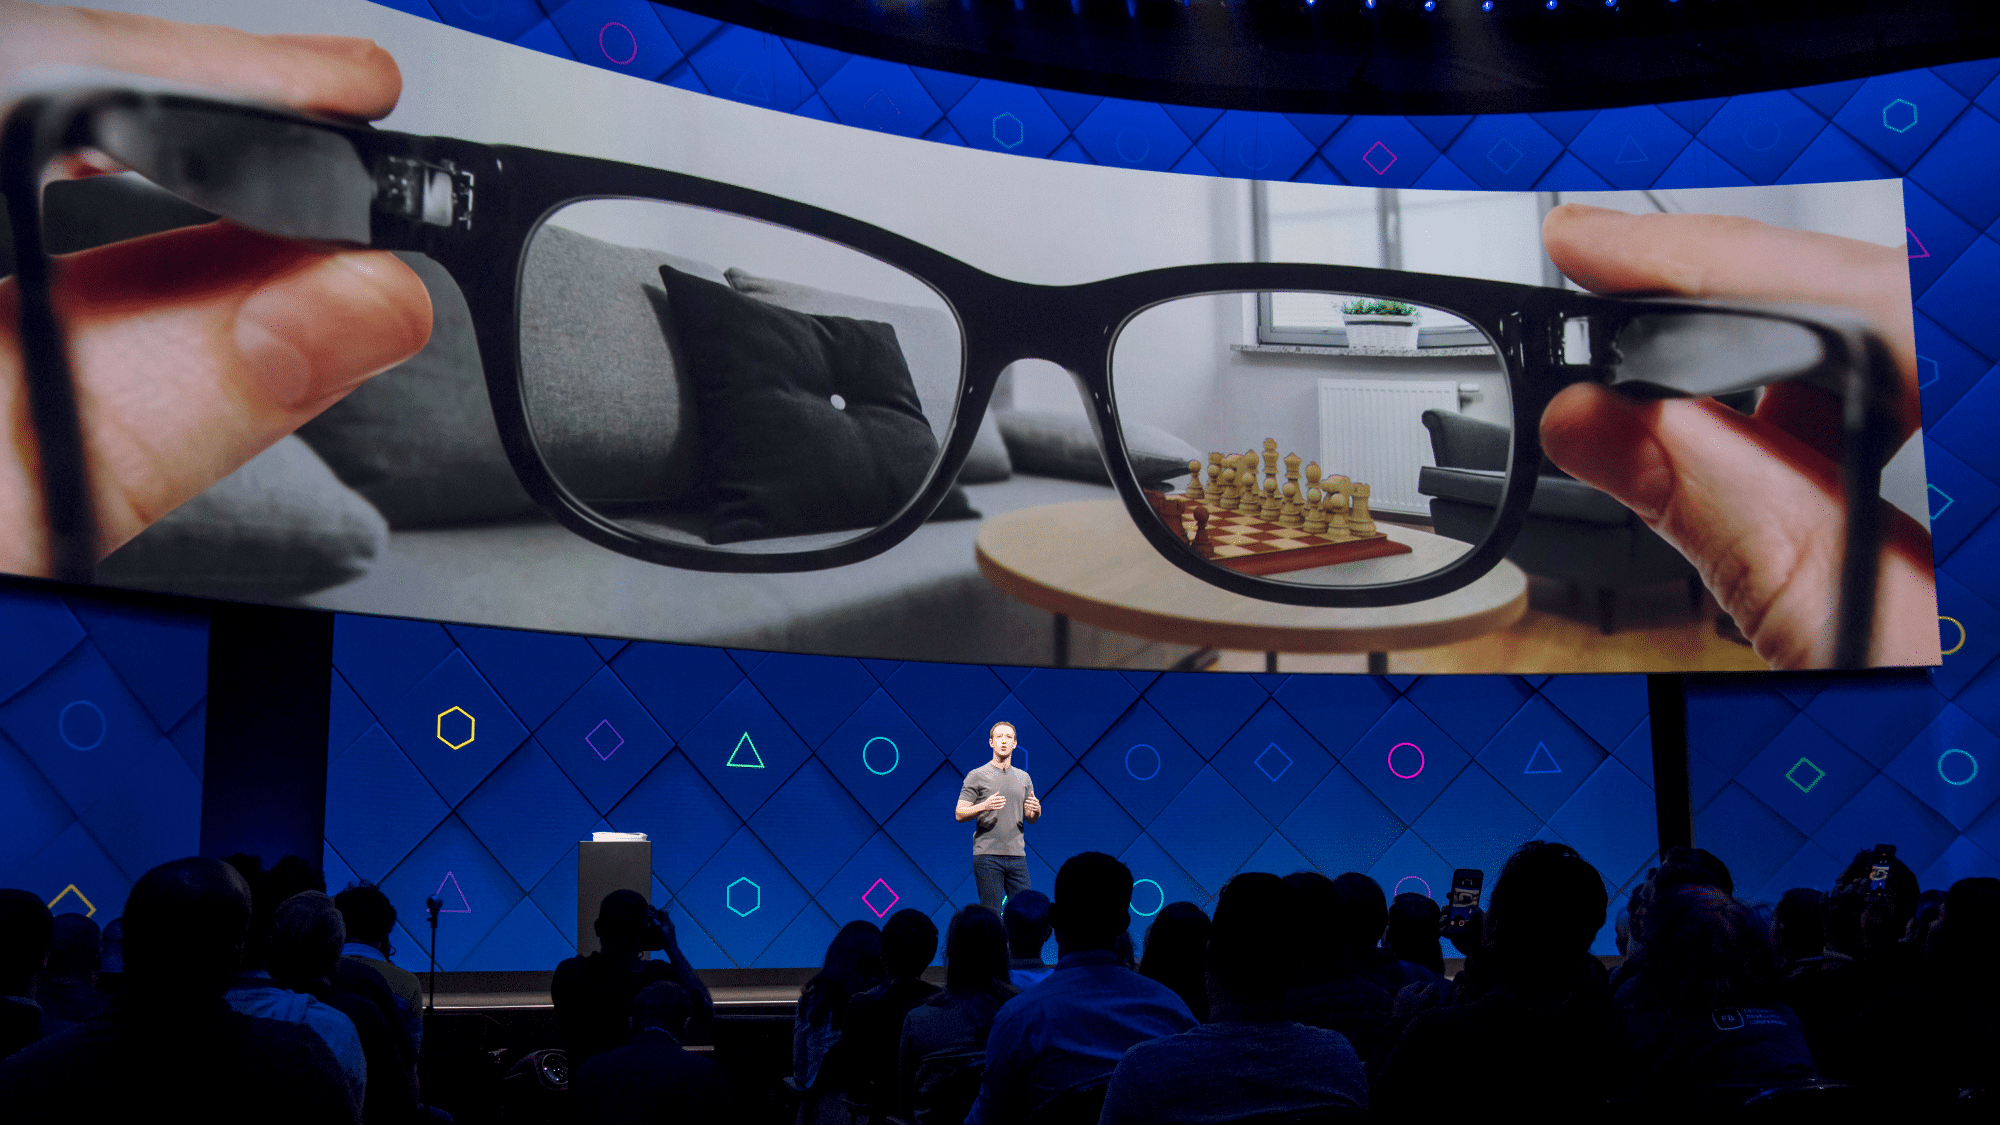 Meta AR Glasses Lead Claims They're As Mindblowing As Original Rift